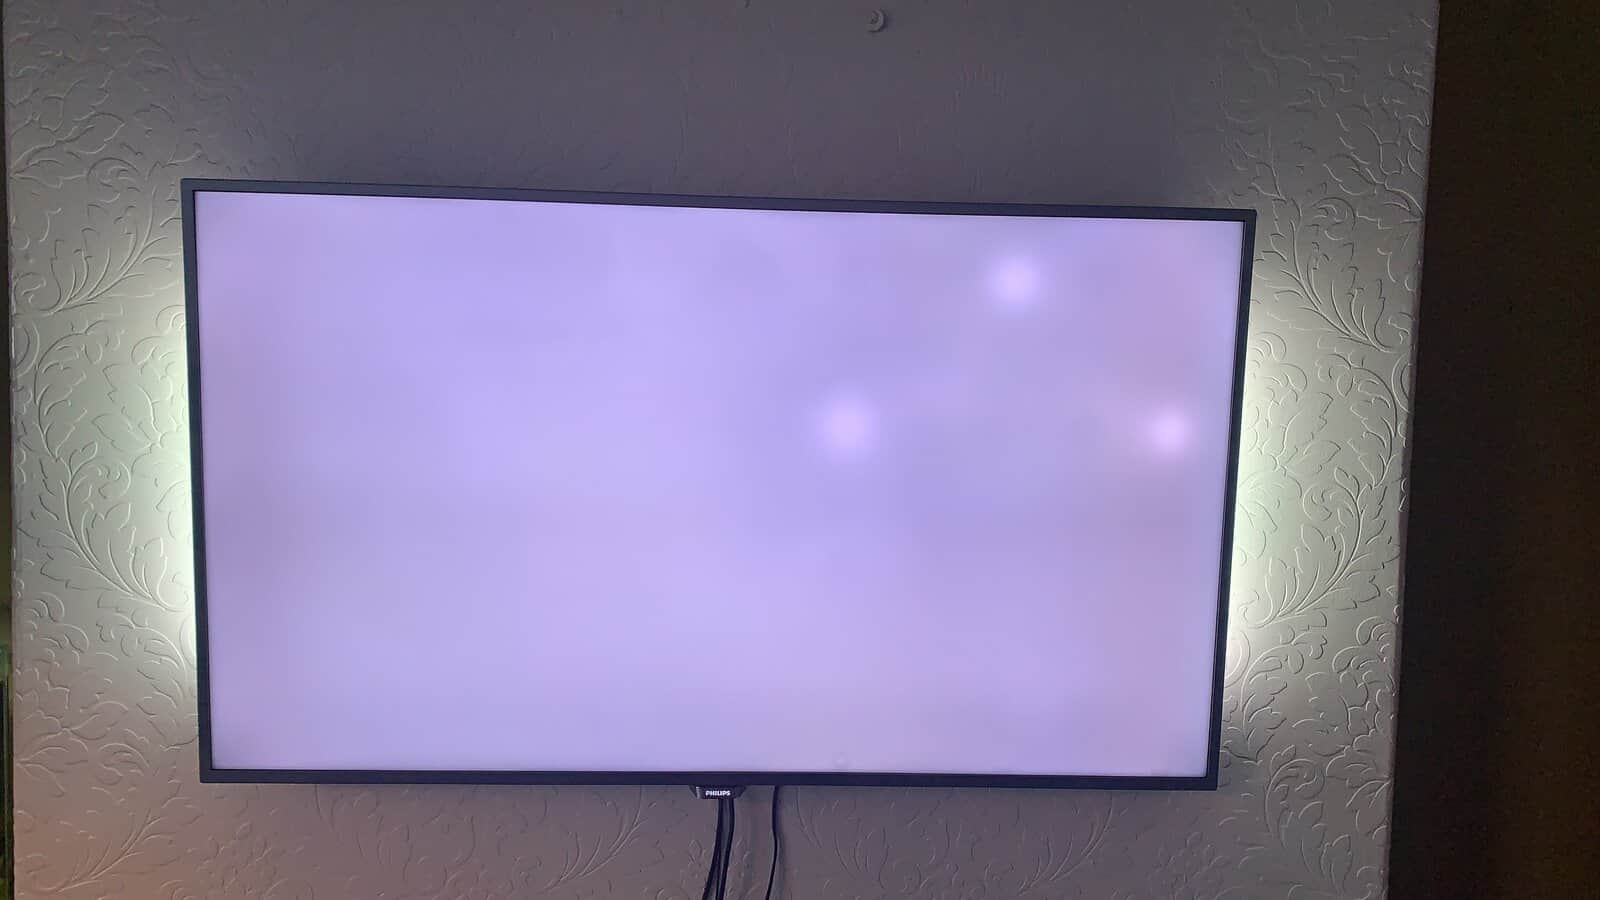 20 How To Fix Bright Spot On Samsung Tv Screen
10/2022